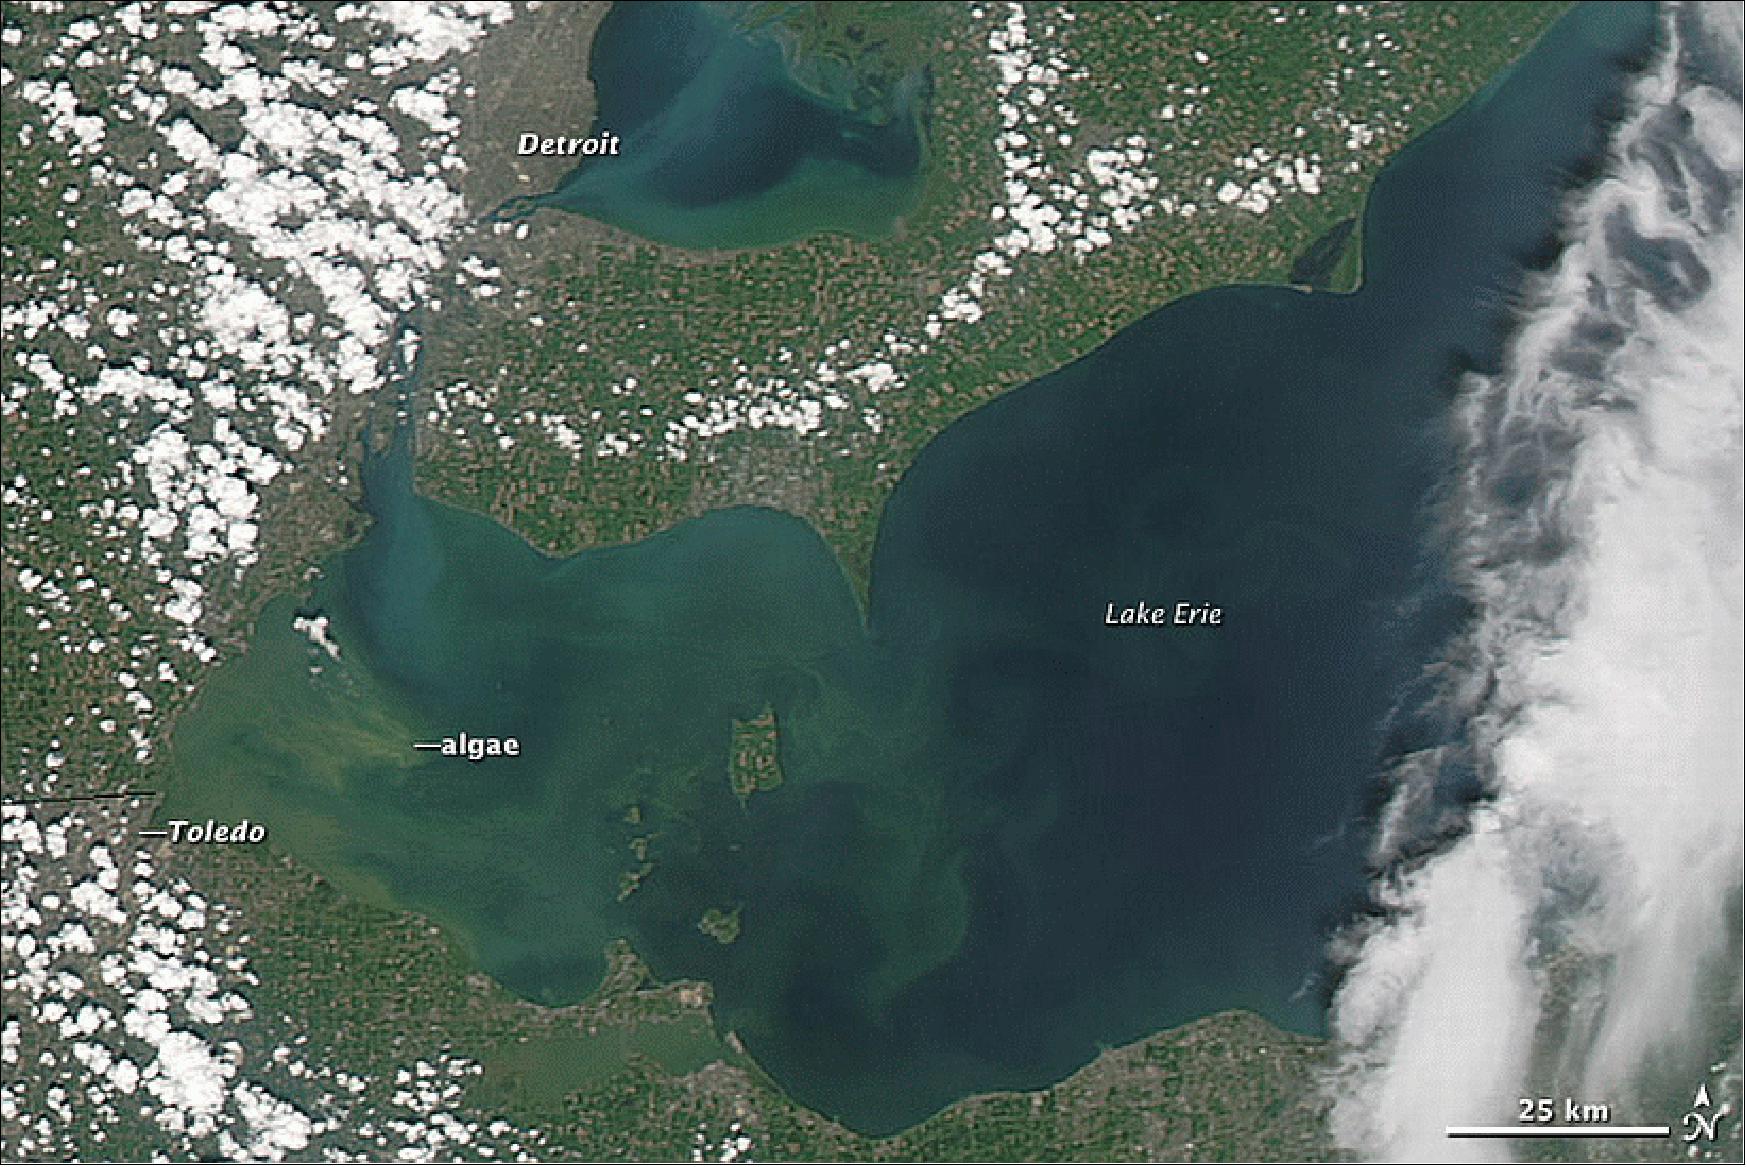 Figure 126: Algae bloom on Lake Erie acquired with the Aqua MODIS instrument on August 3, 2014 (image credit: NASA Earth Observatory)